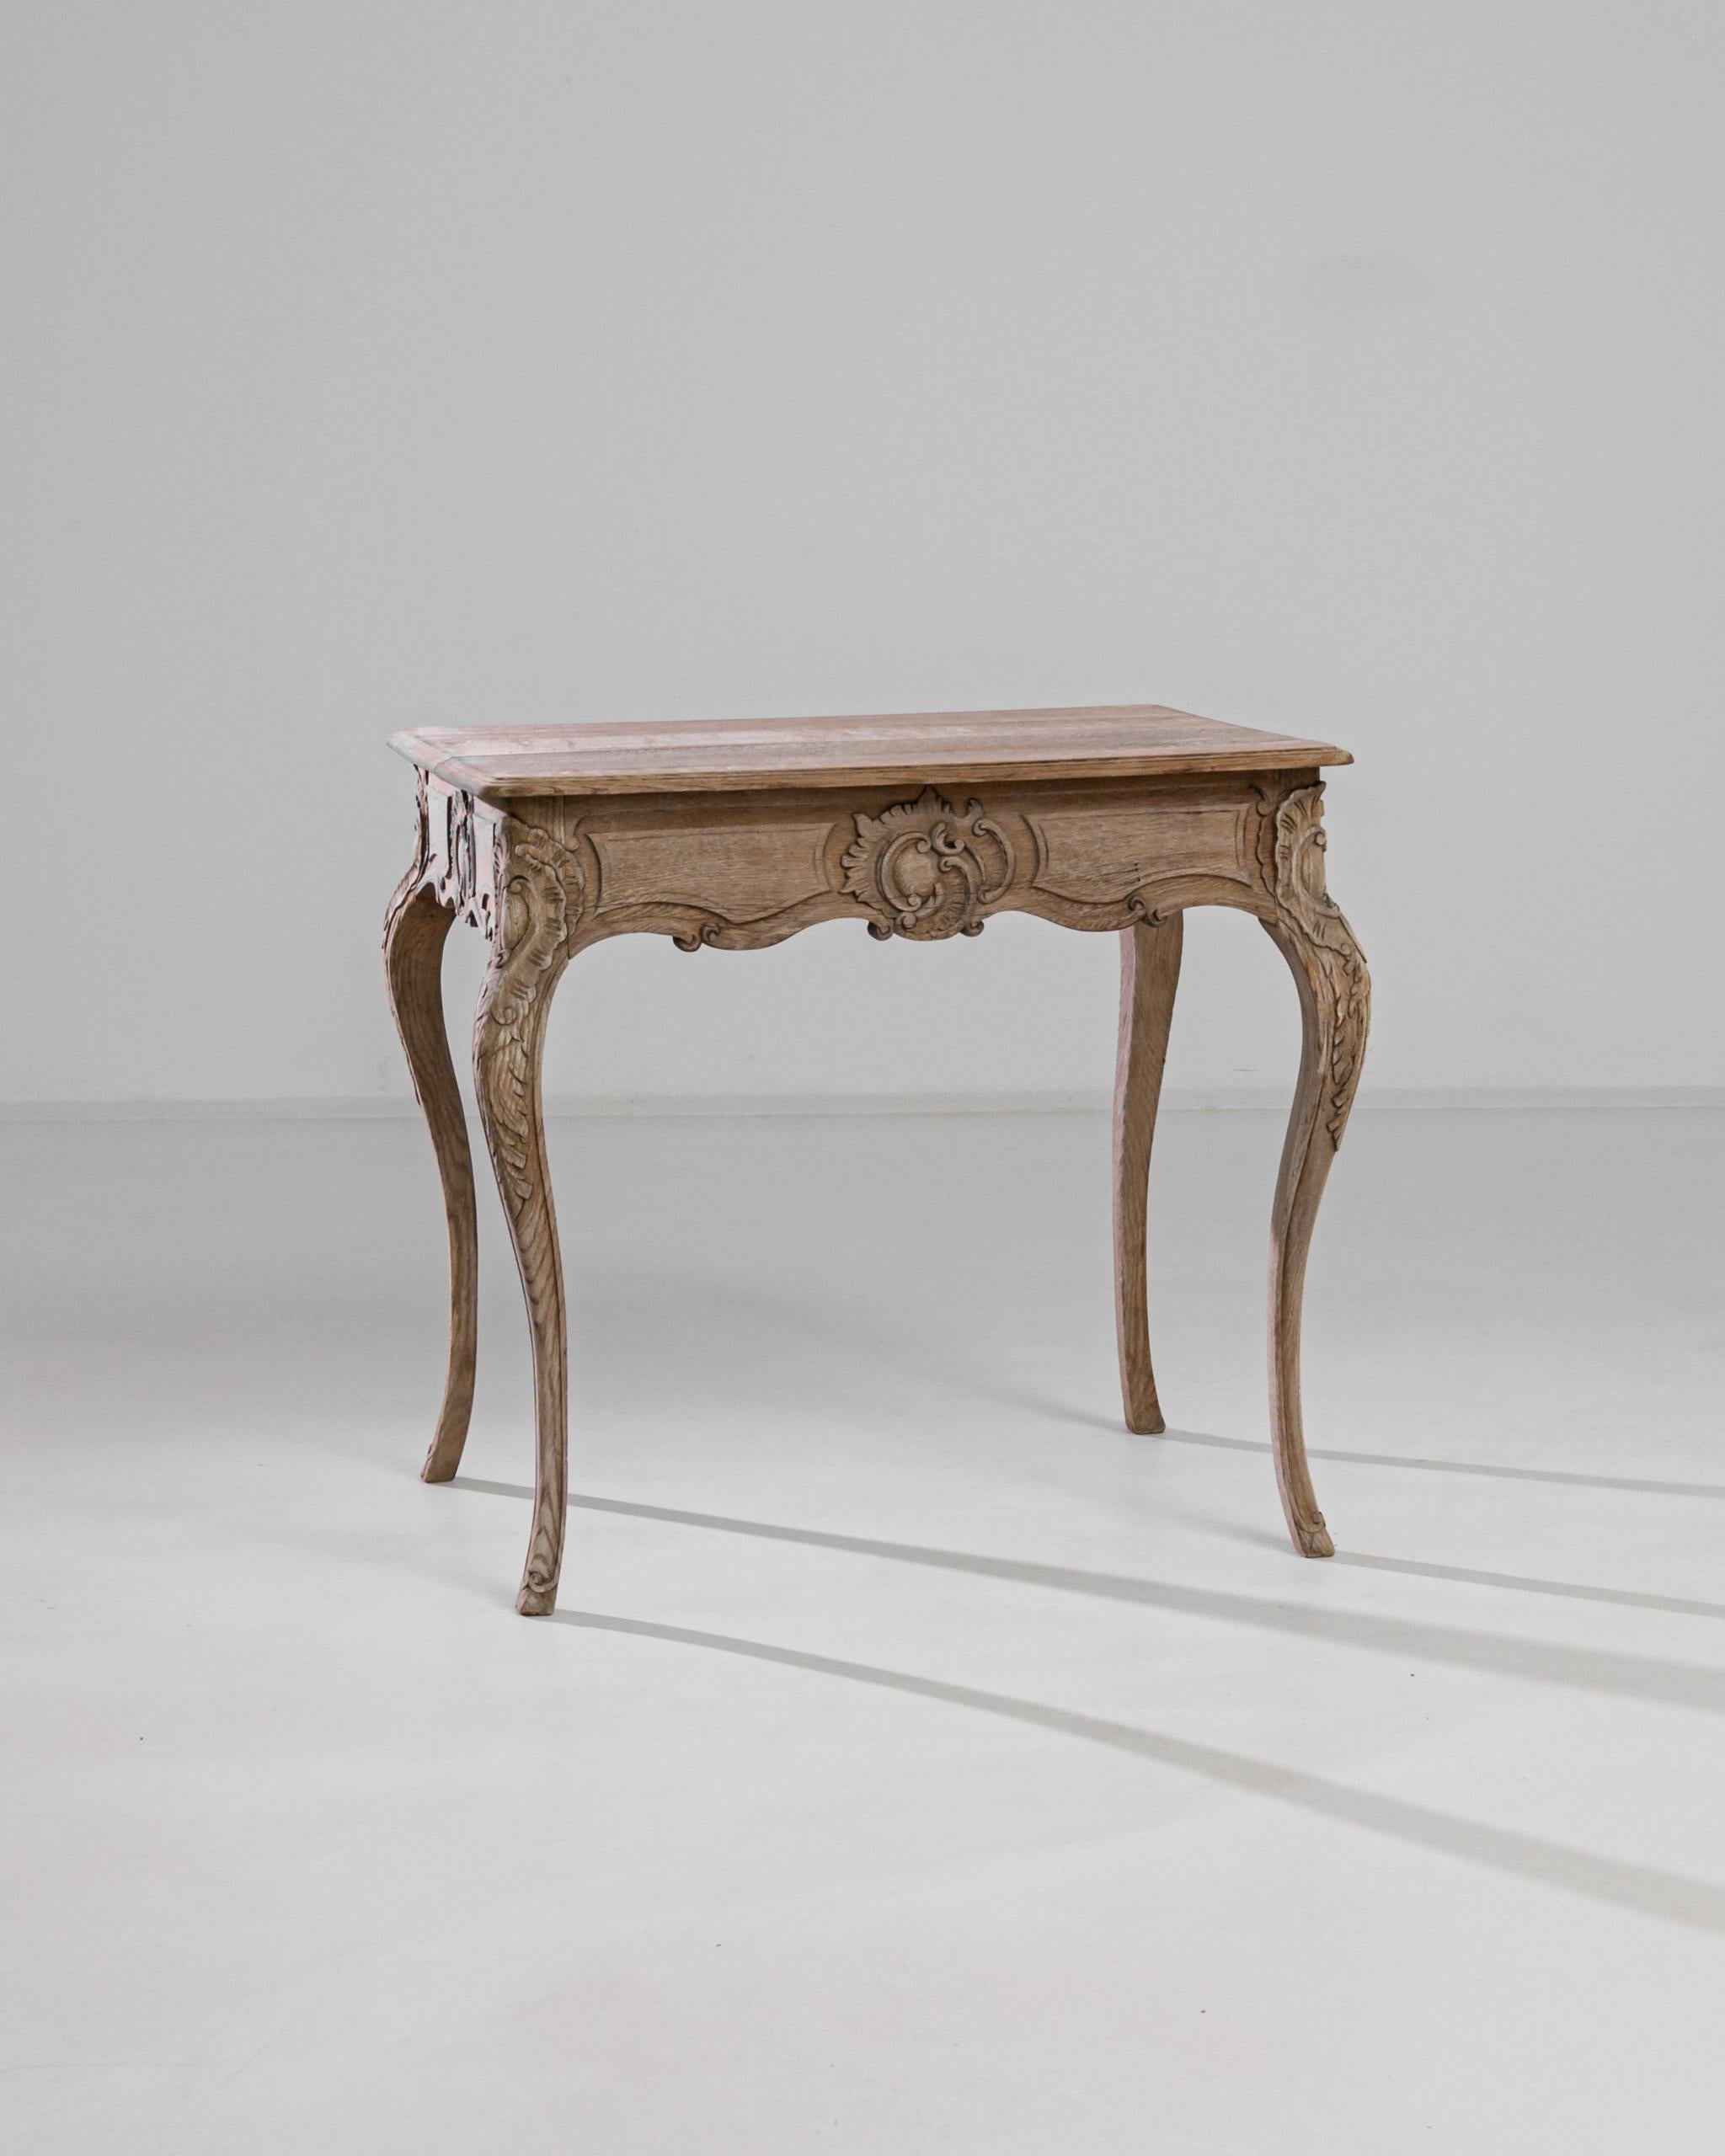 An antique bleached oak table from France with distinctive curved legs. Stylish and practical with a versatile shape, four limbs stretch to support the scalloped apron and a softly beveled tabletop. 

Perched on cabriole legs – the piece imparts a